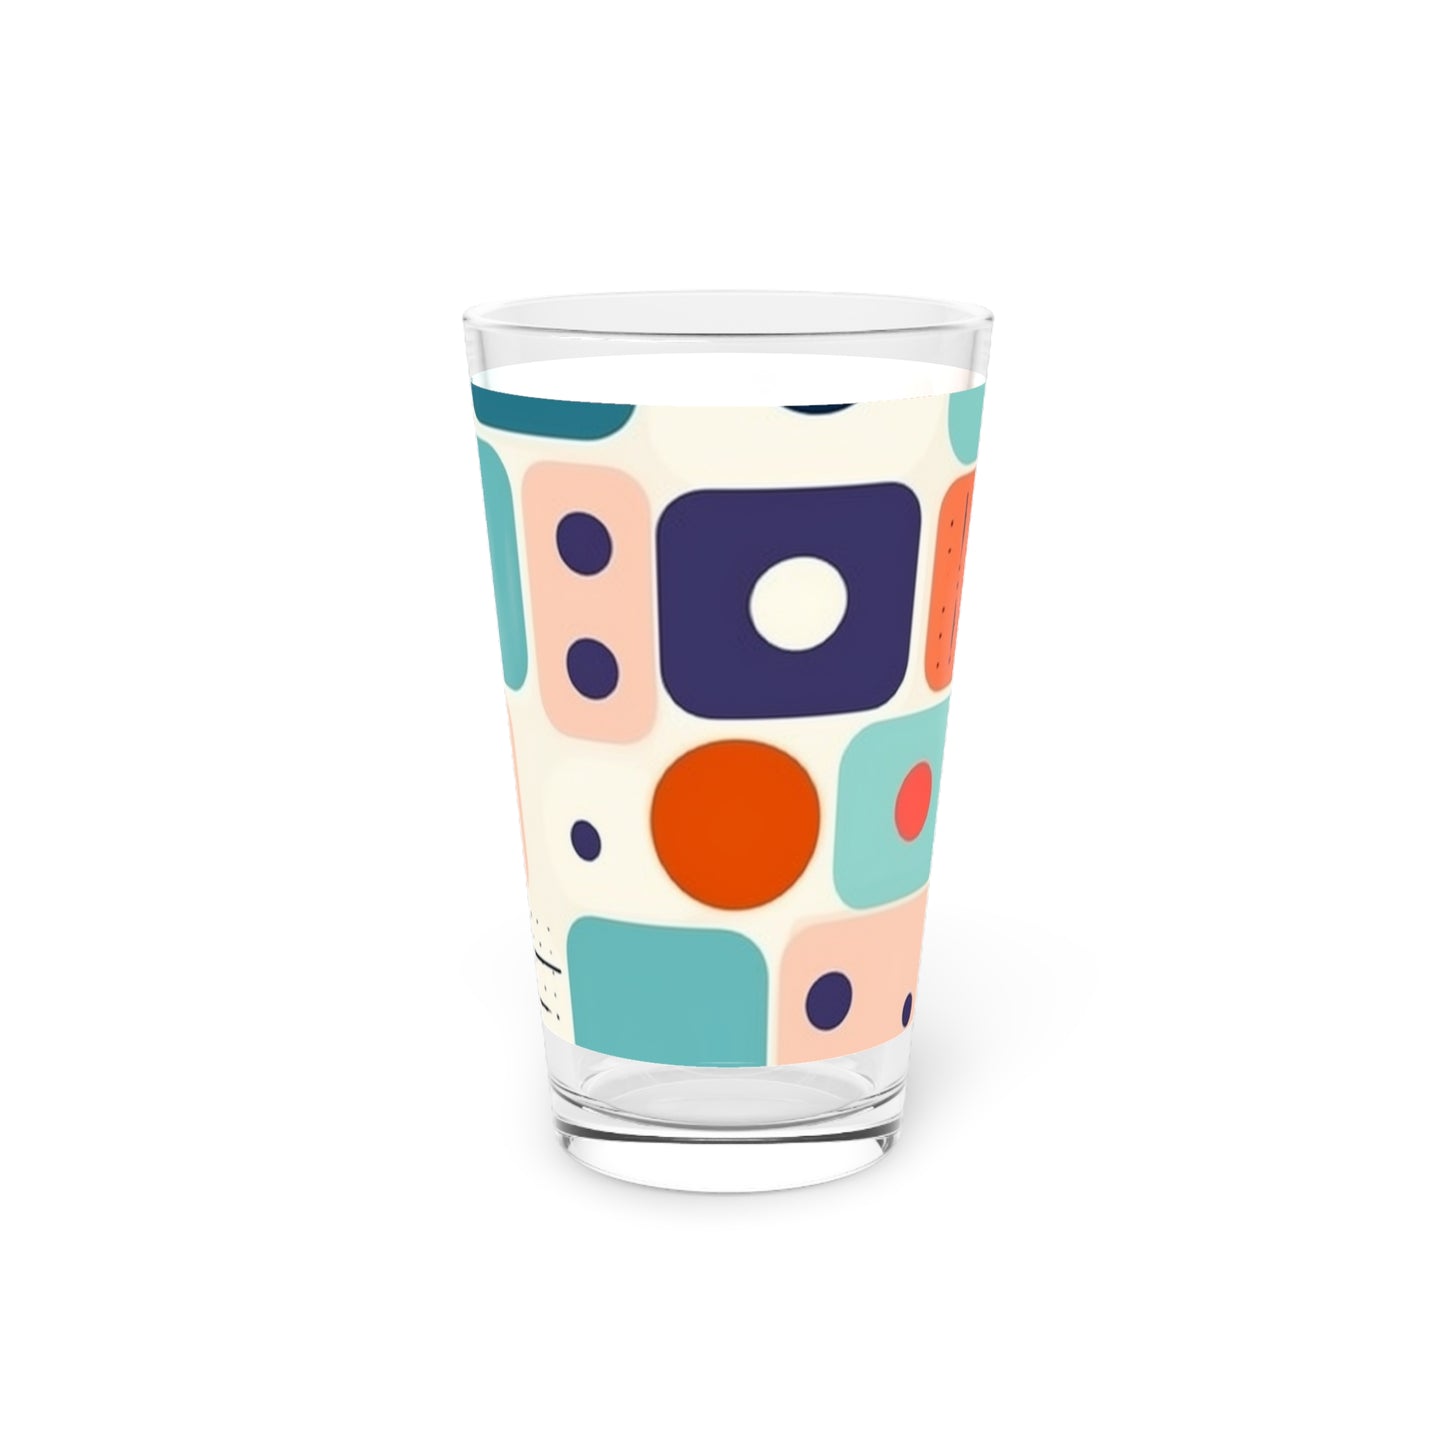 Retro Chic: Atomic Age-Inspired Pint Glass